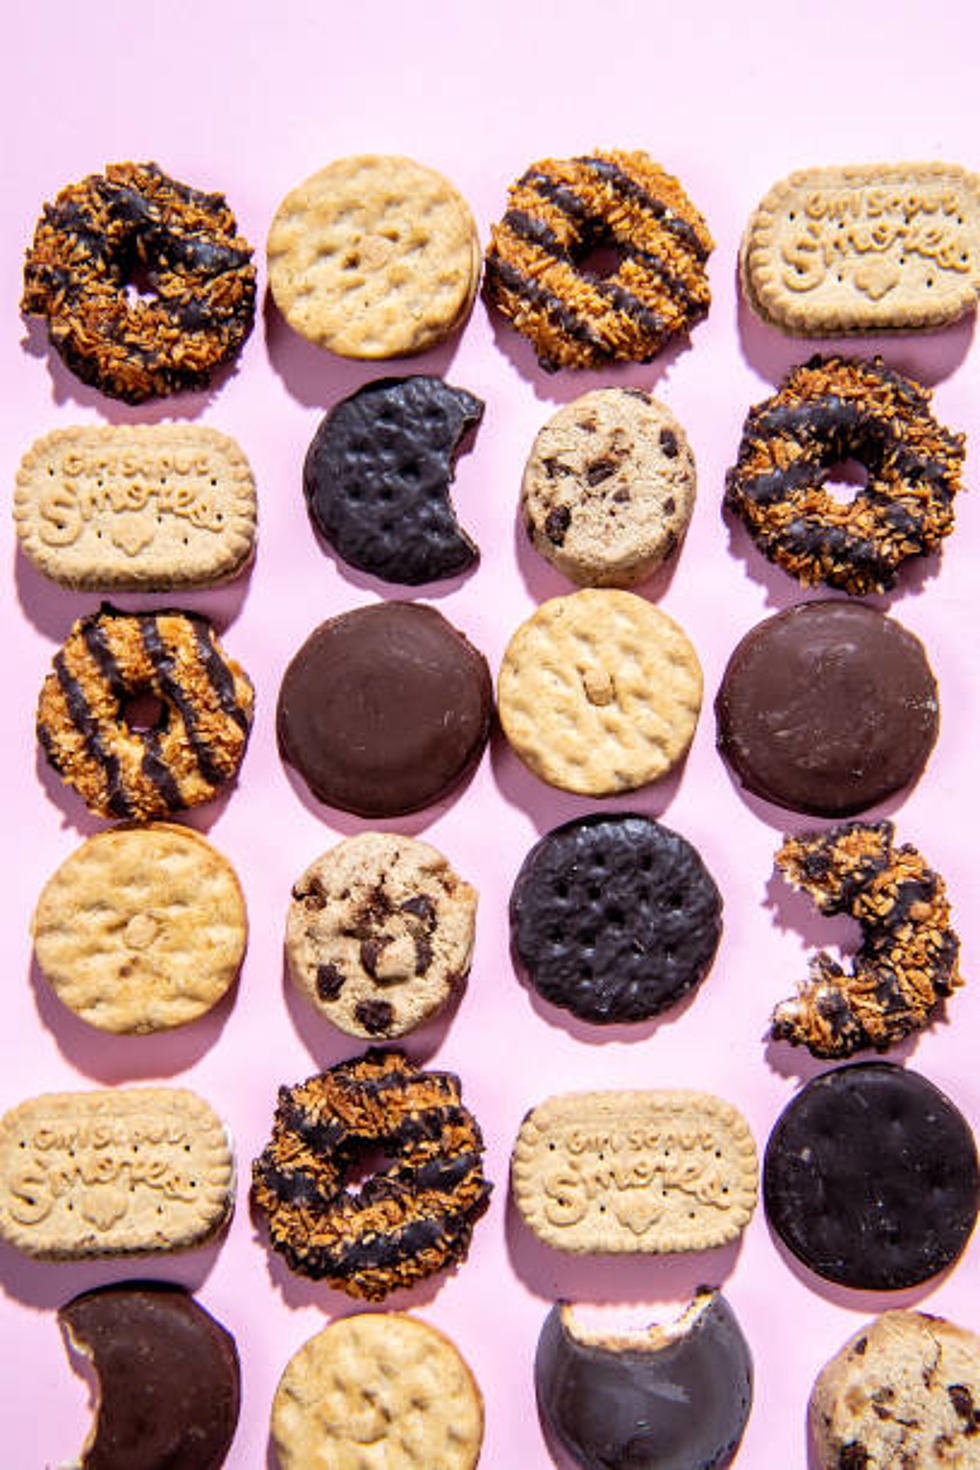 Girl Scout Cookies in New Jersey Ranked